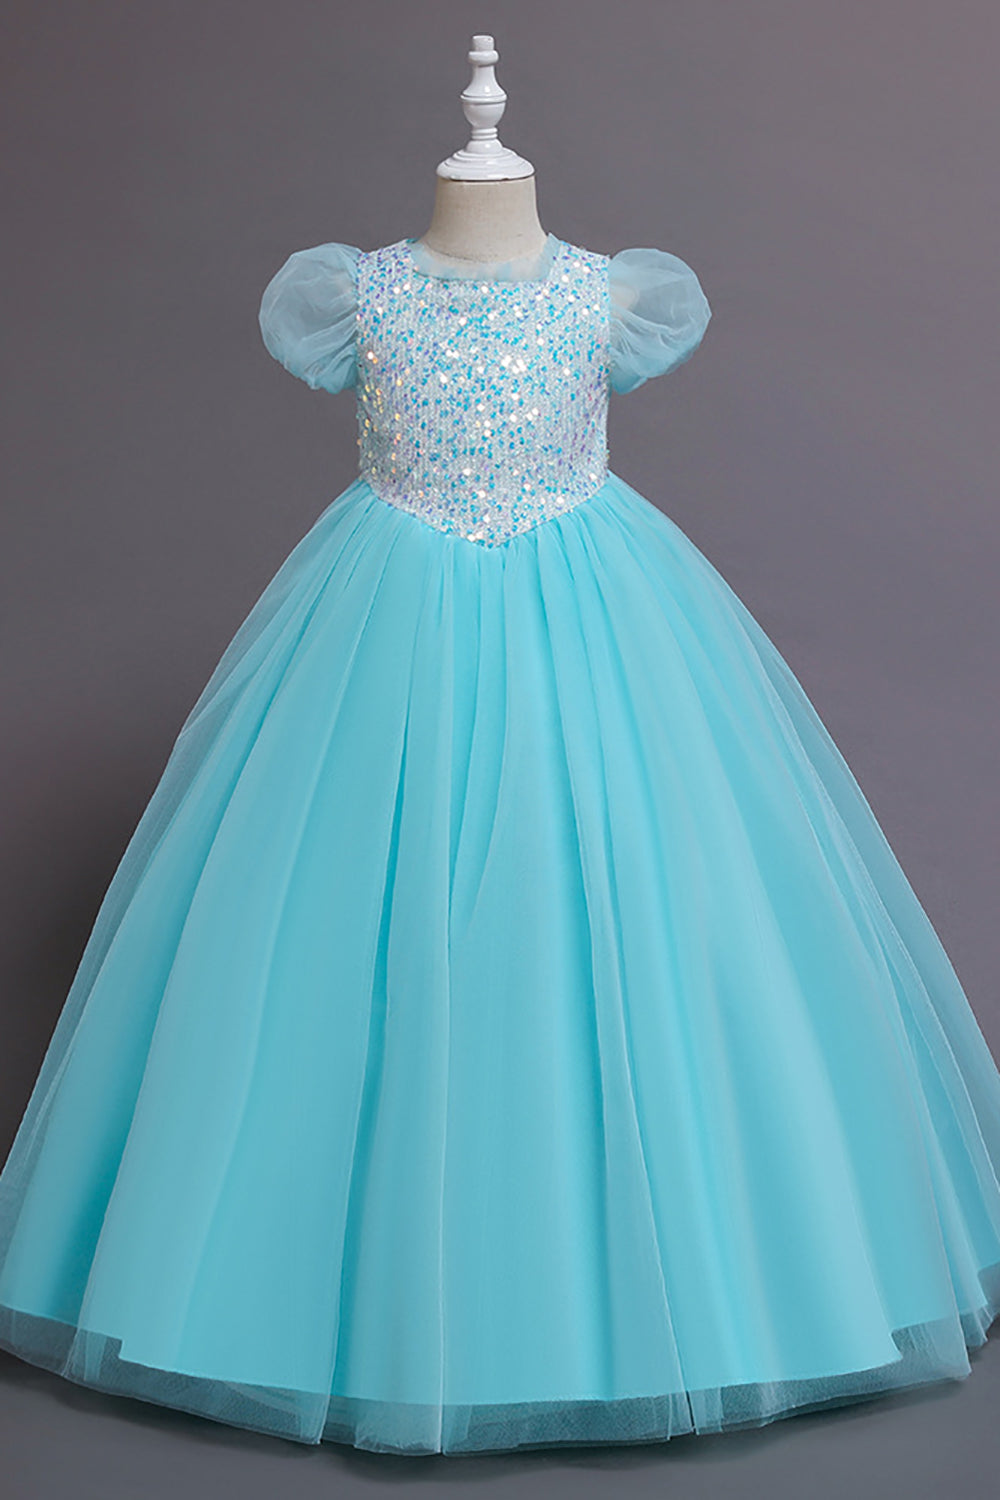 Tulle Puff Sleeves Light Blue Flower Girl Dress with Sequins